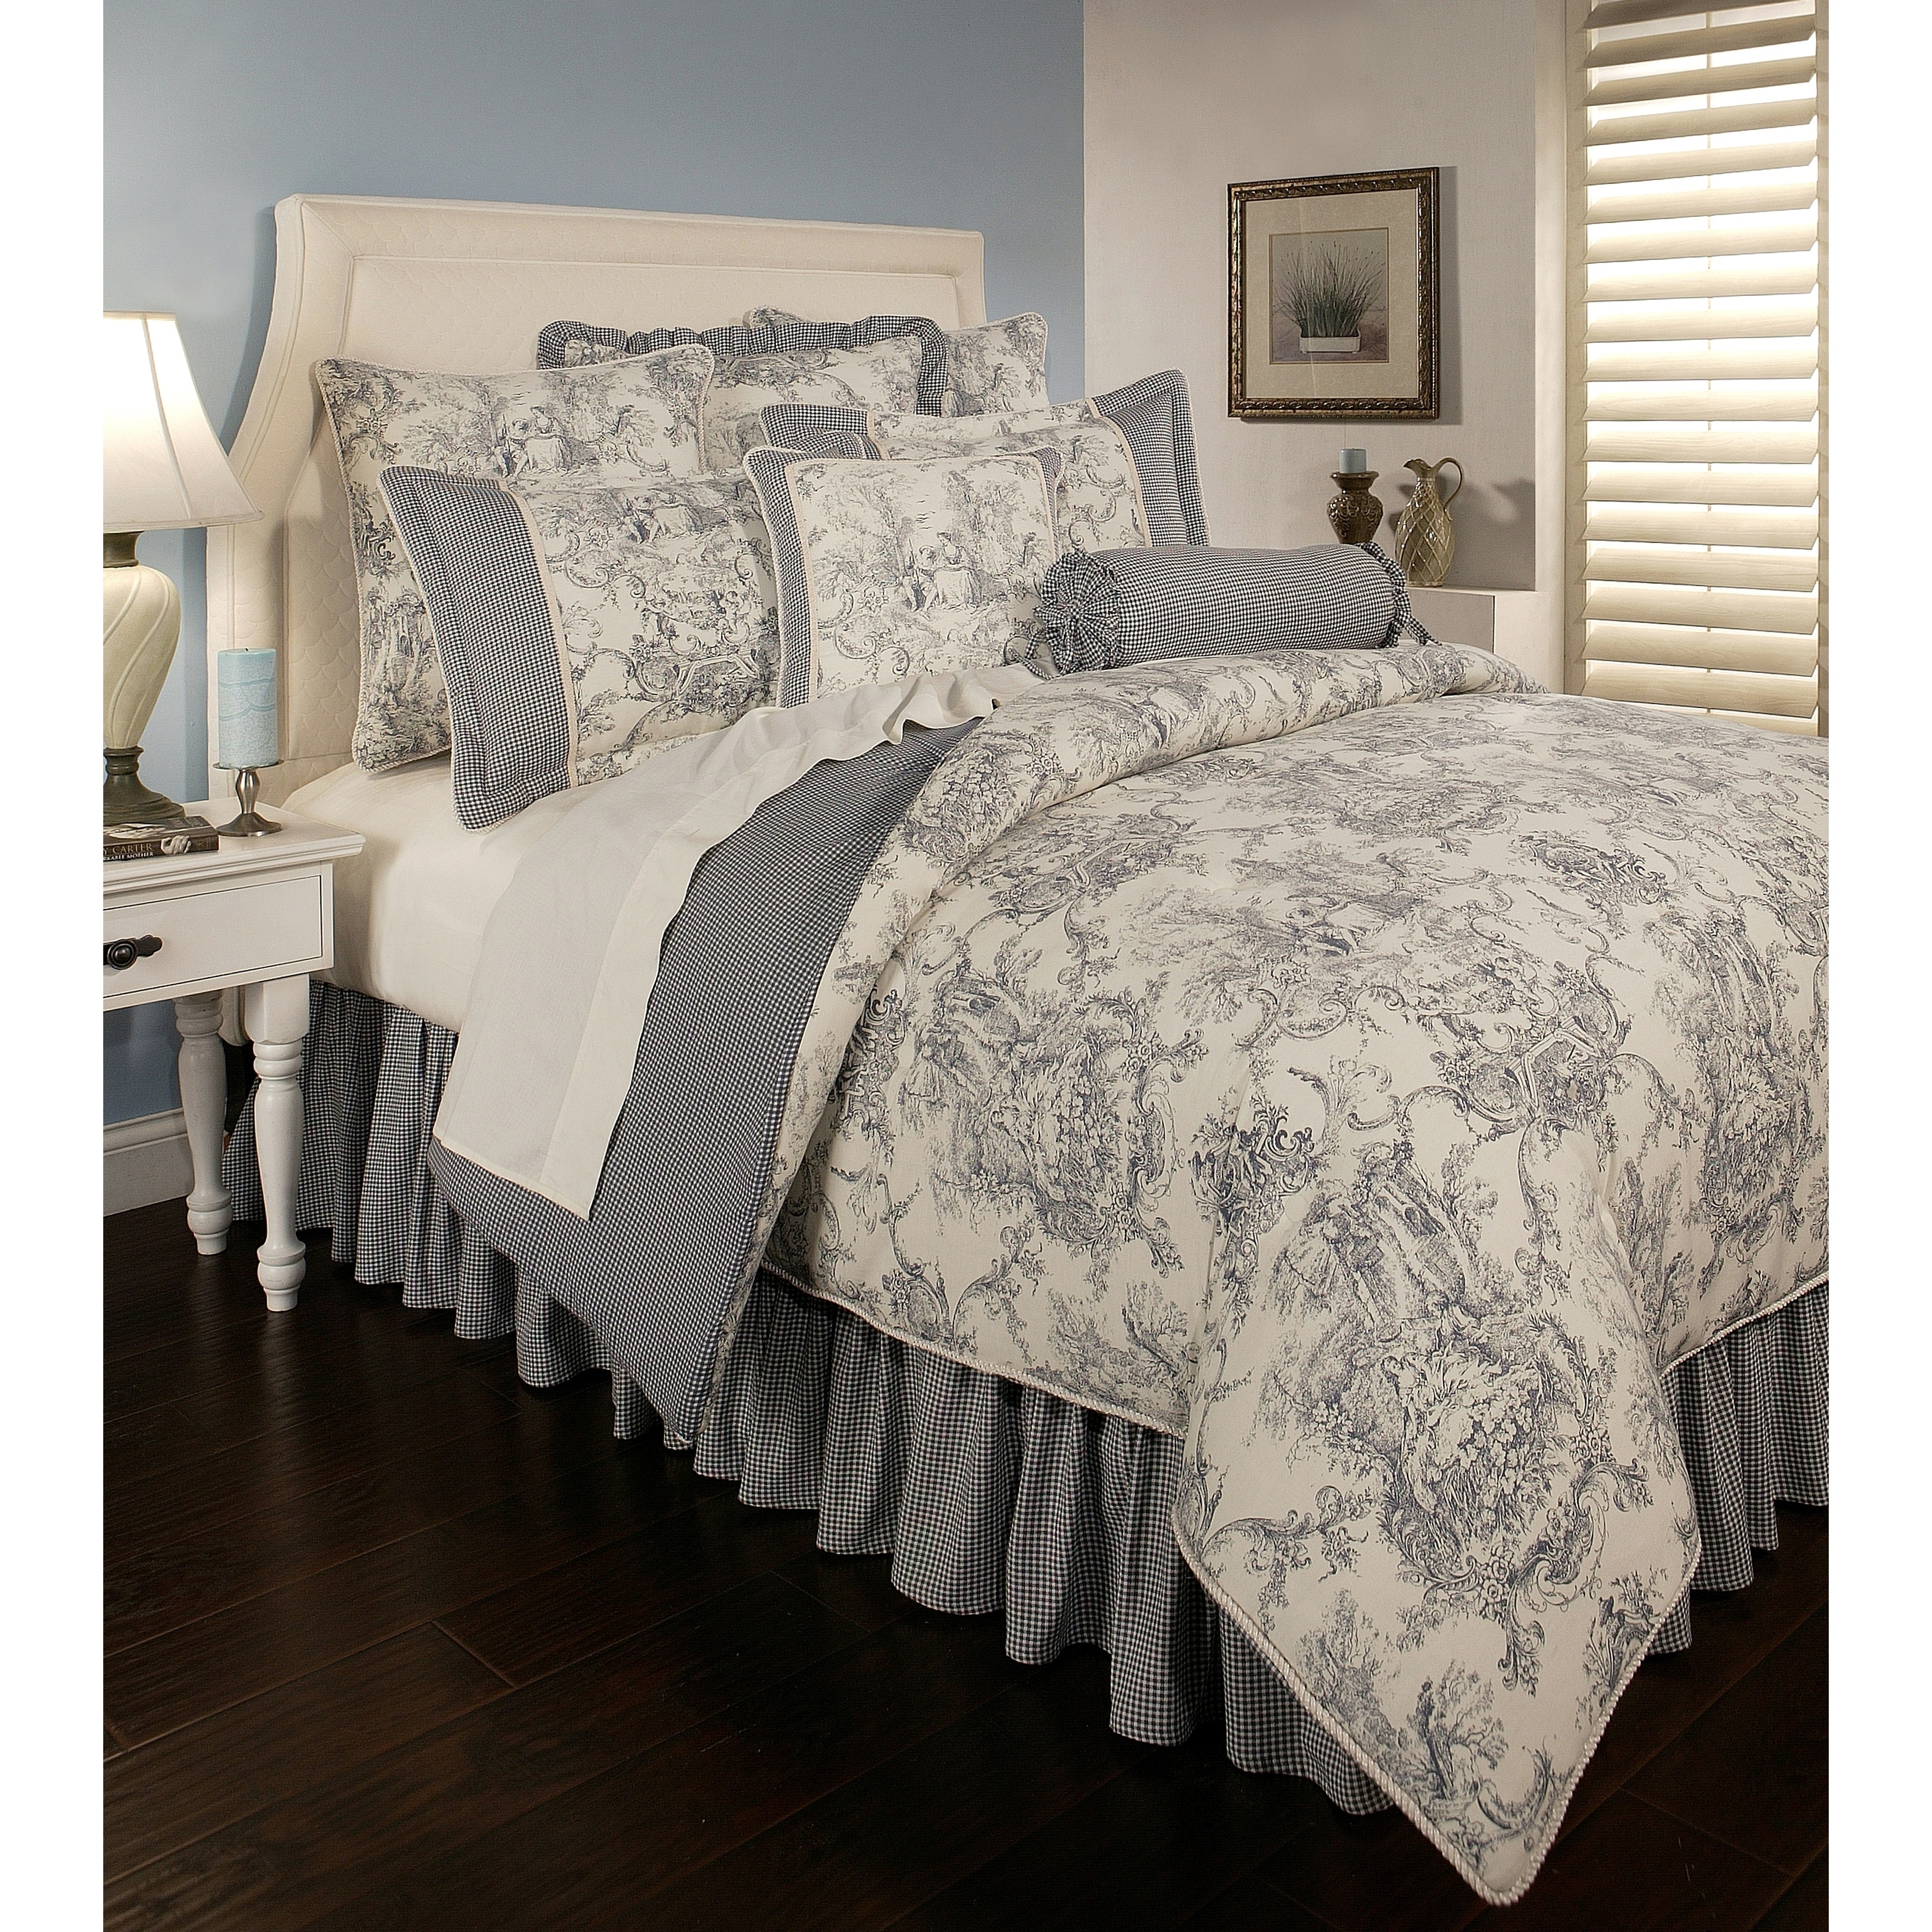 Shop Pchf Country Toile Blue 3 Piece Comforter Set Overstock